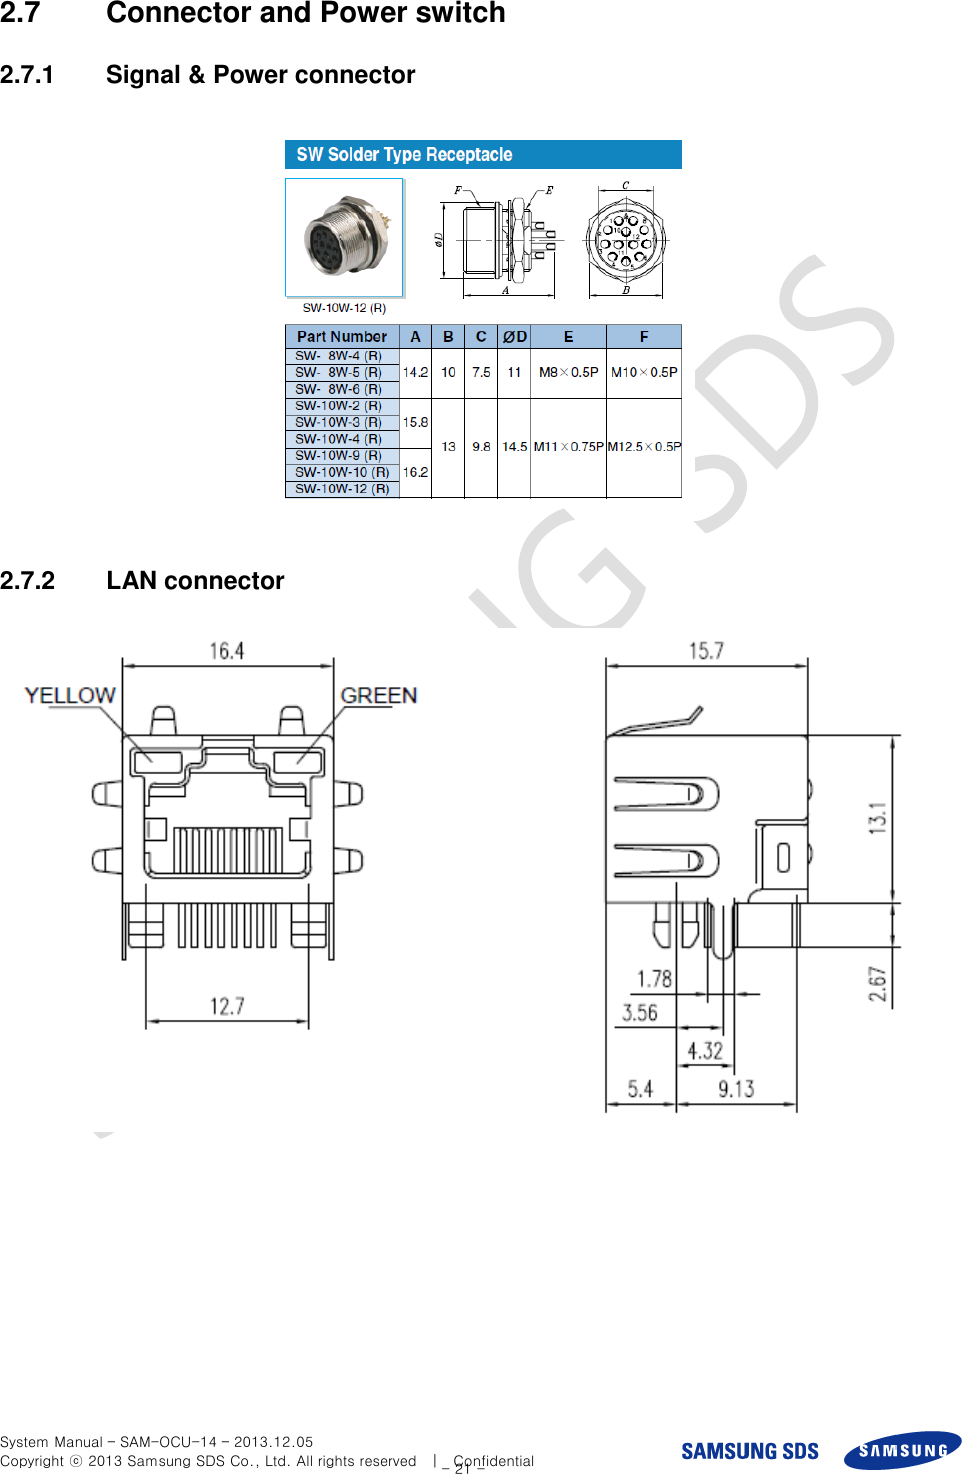  System Manual – SAM-OCU-14 – 2013.12.05 Copyright ⓒ 2013 Samsung SDS Co., Ltd. All rights reserved    |    Confidential - 21 - 2.7  Connector and Power switch 2.7.1  Signal &amp; Power connector   2.7.2  LAN connector   